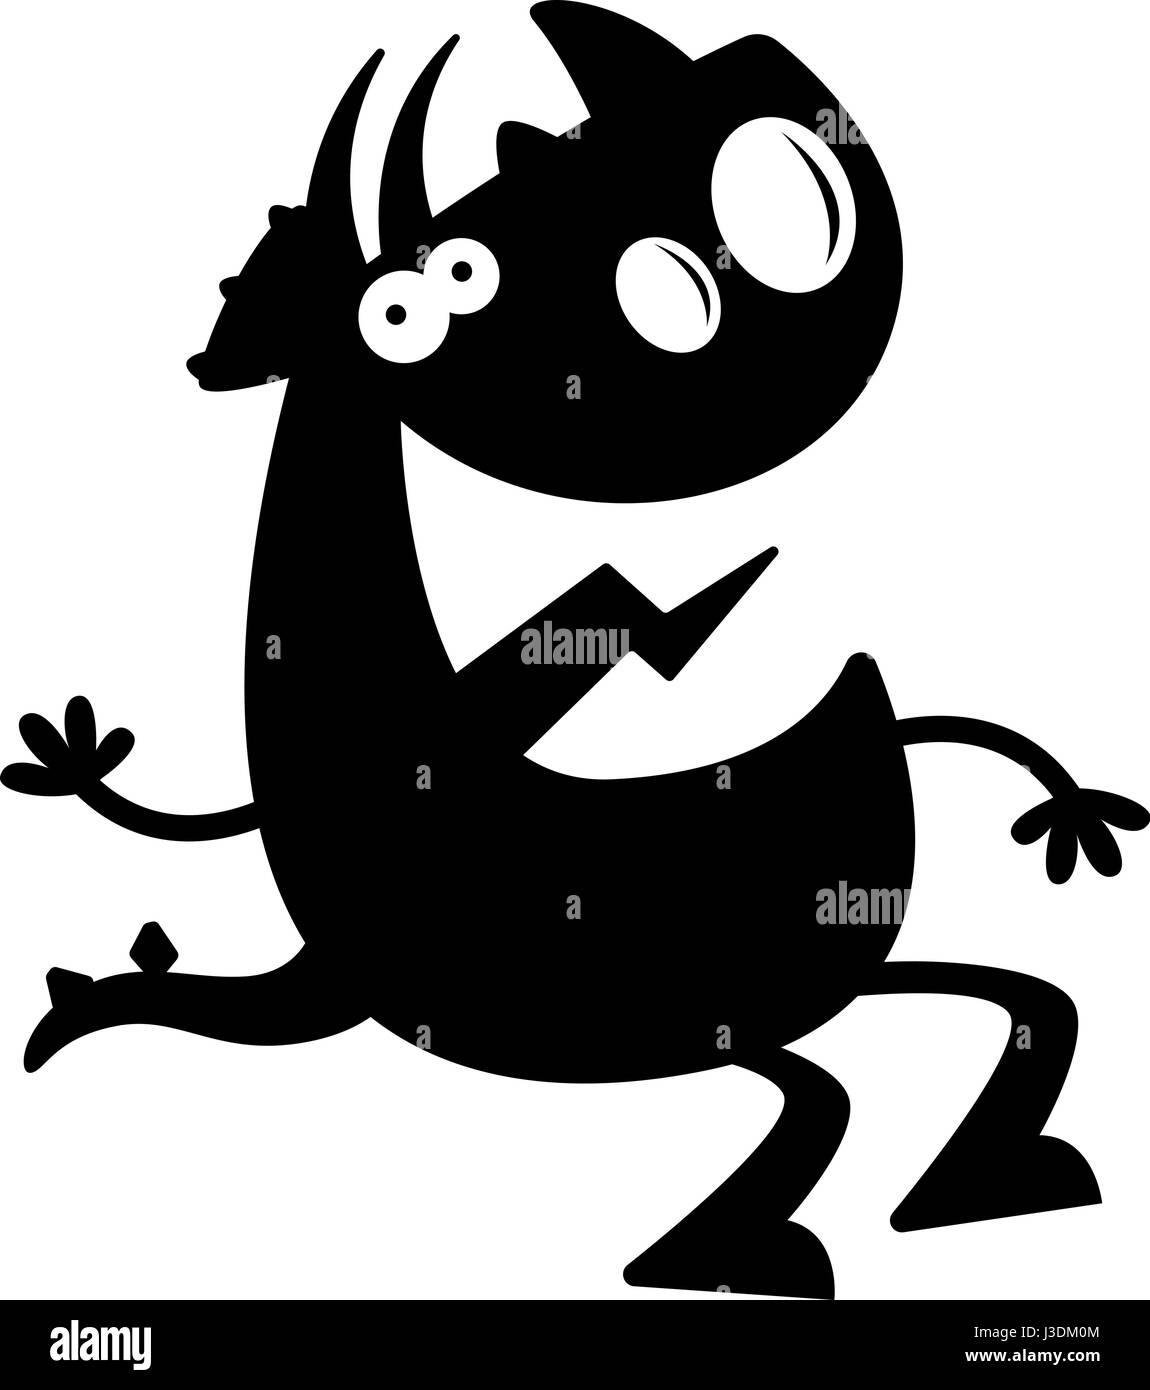 A cartoon silhouette of a triceratops dinosaur sitting and waving. Stock Vector